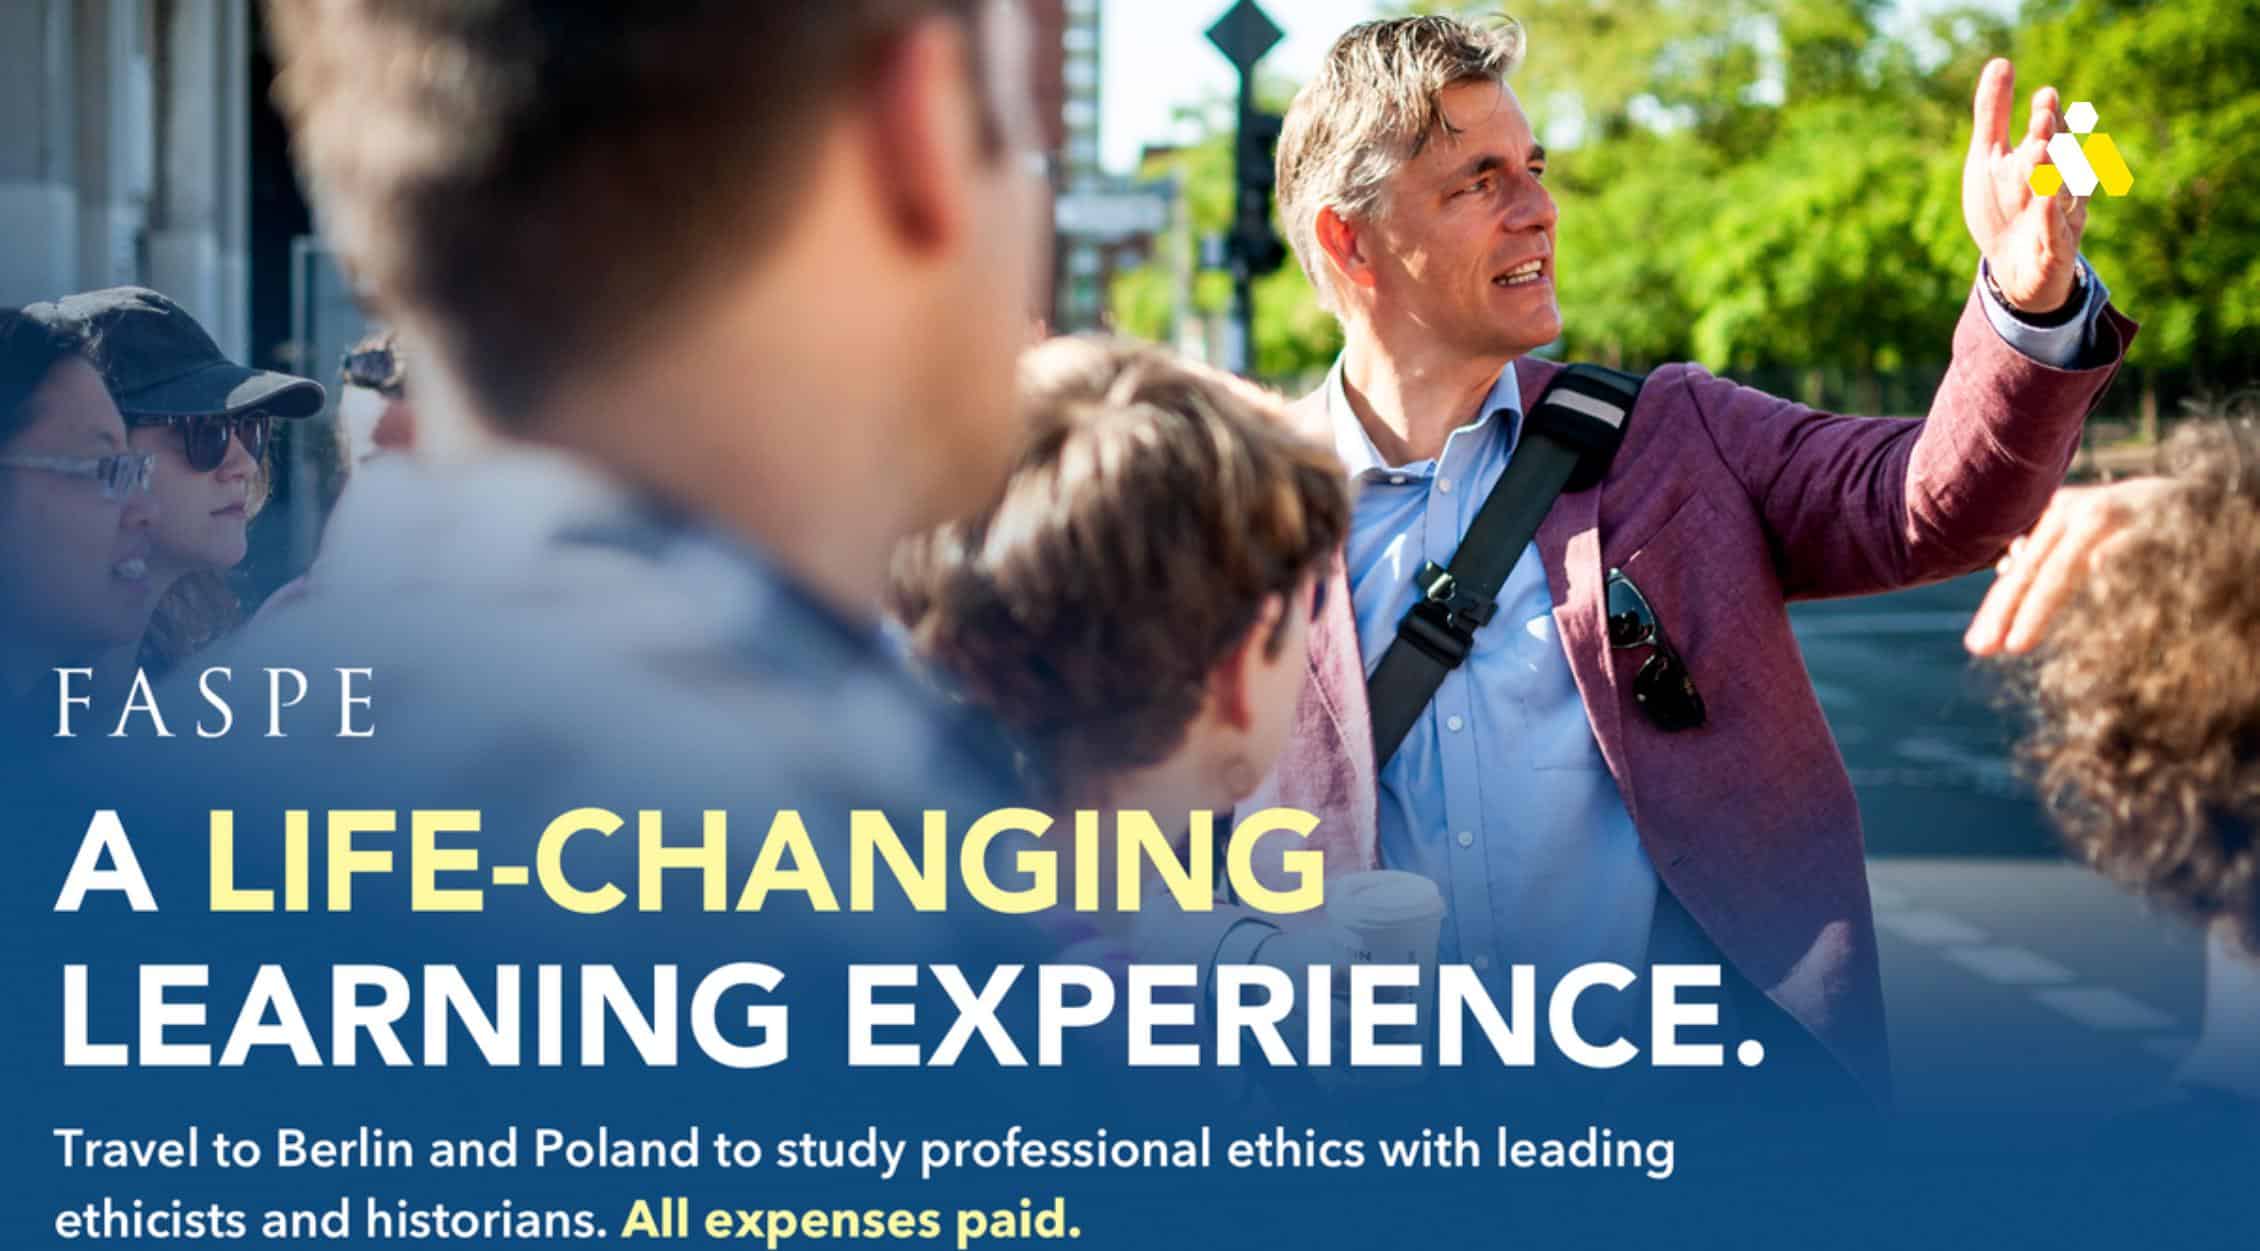 A Life-Changing Learning Experience. Travel to Berlin and Polan to study professional ethics with leading ethicists and historians. All expenses paid.